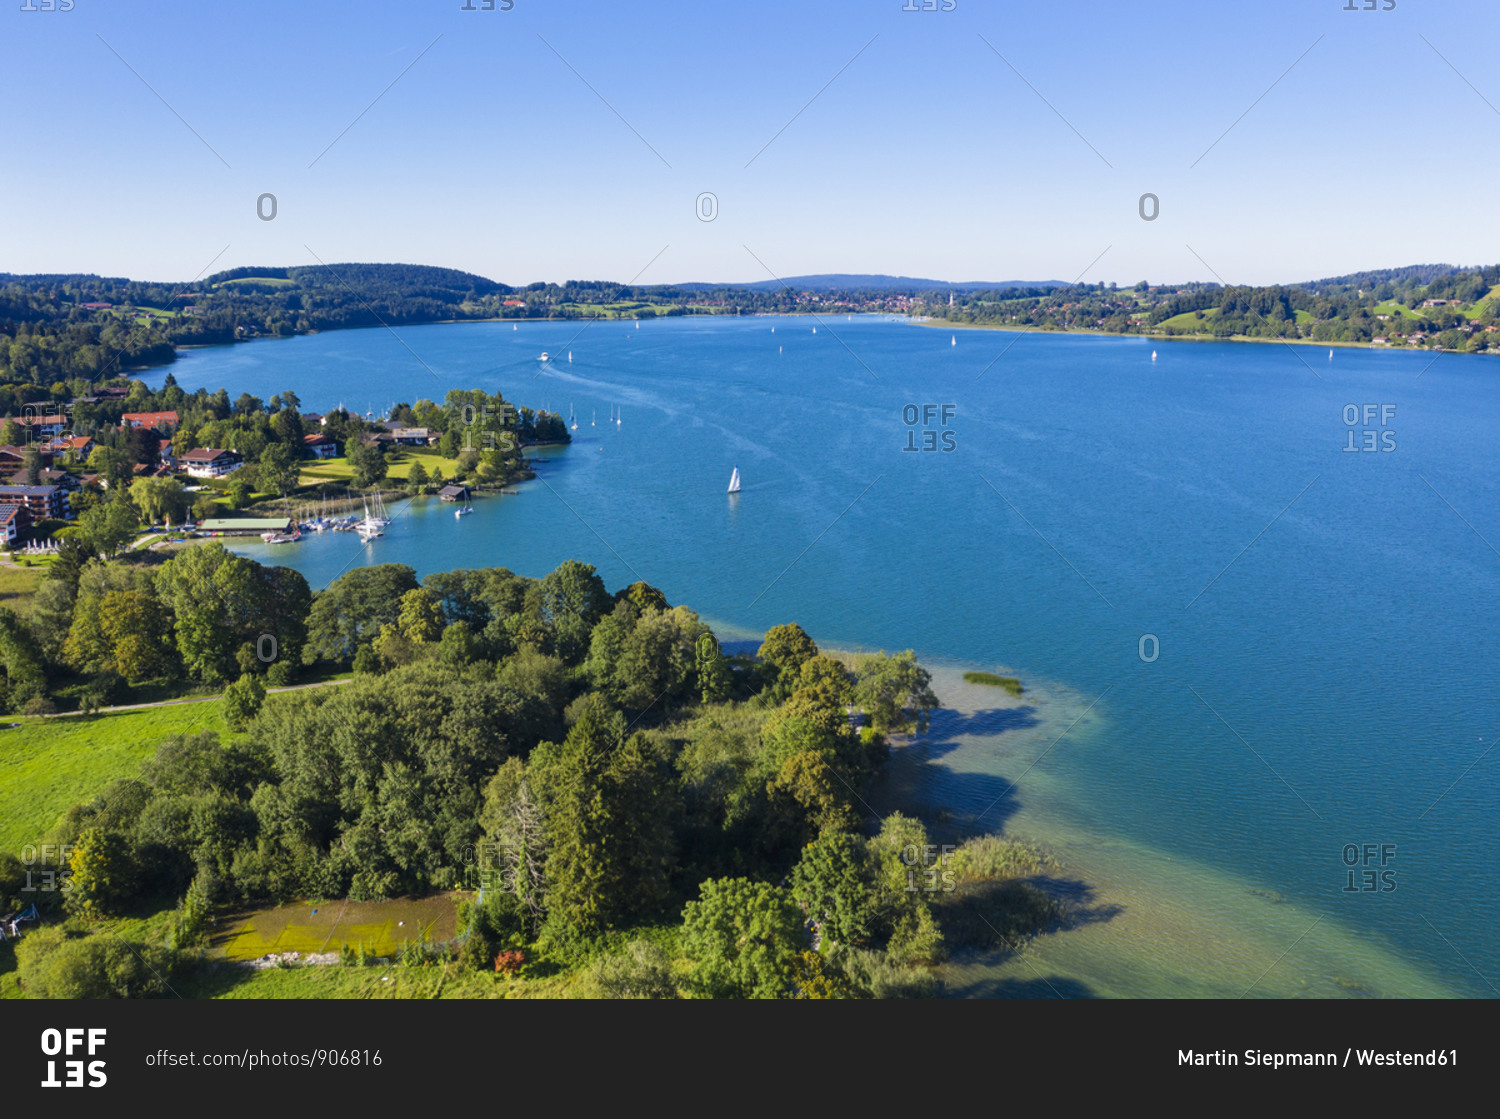 Germany- Bavaria- Bad Wiessee- Aerial view of Tegernsee lake and lakeshore town in summer